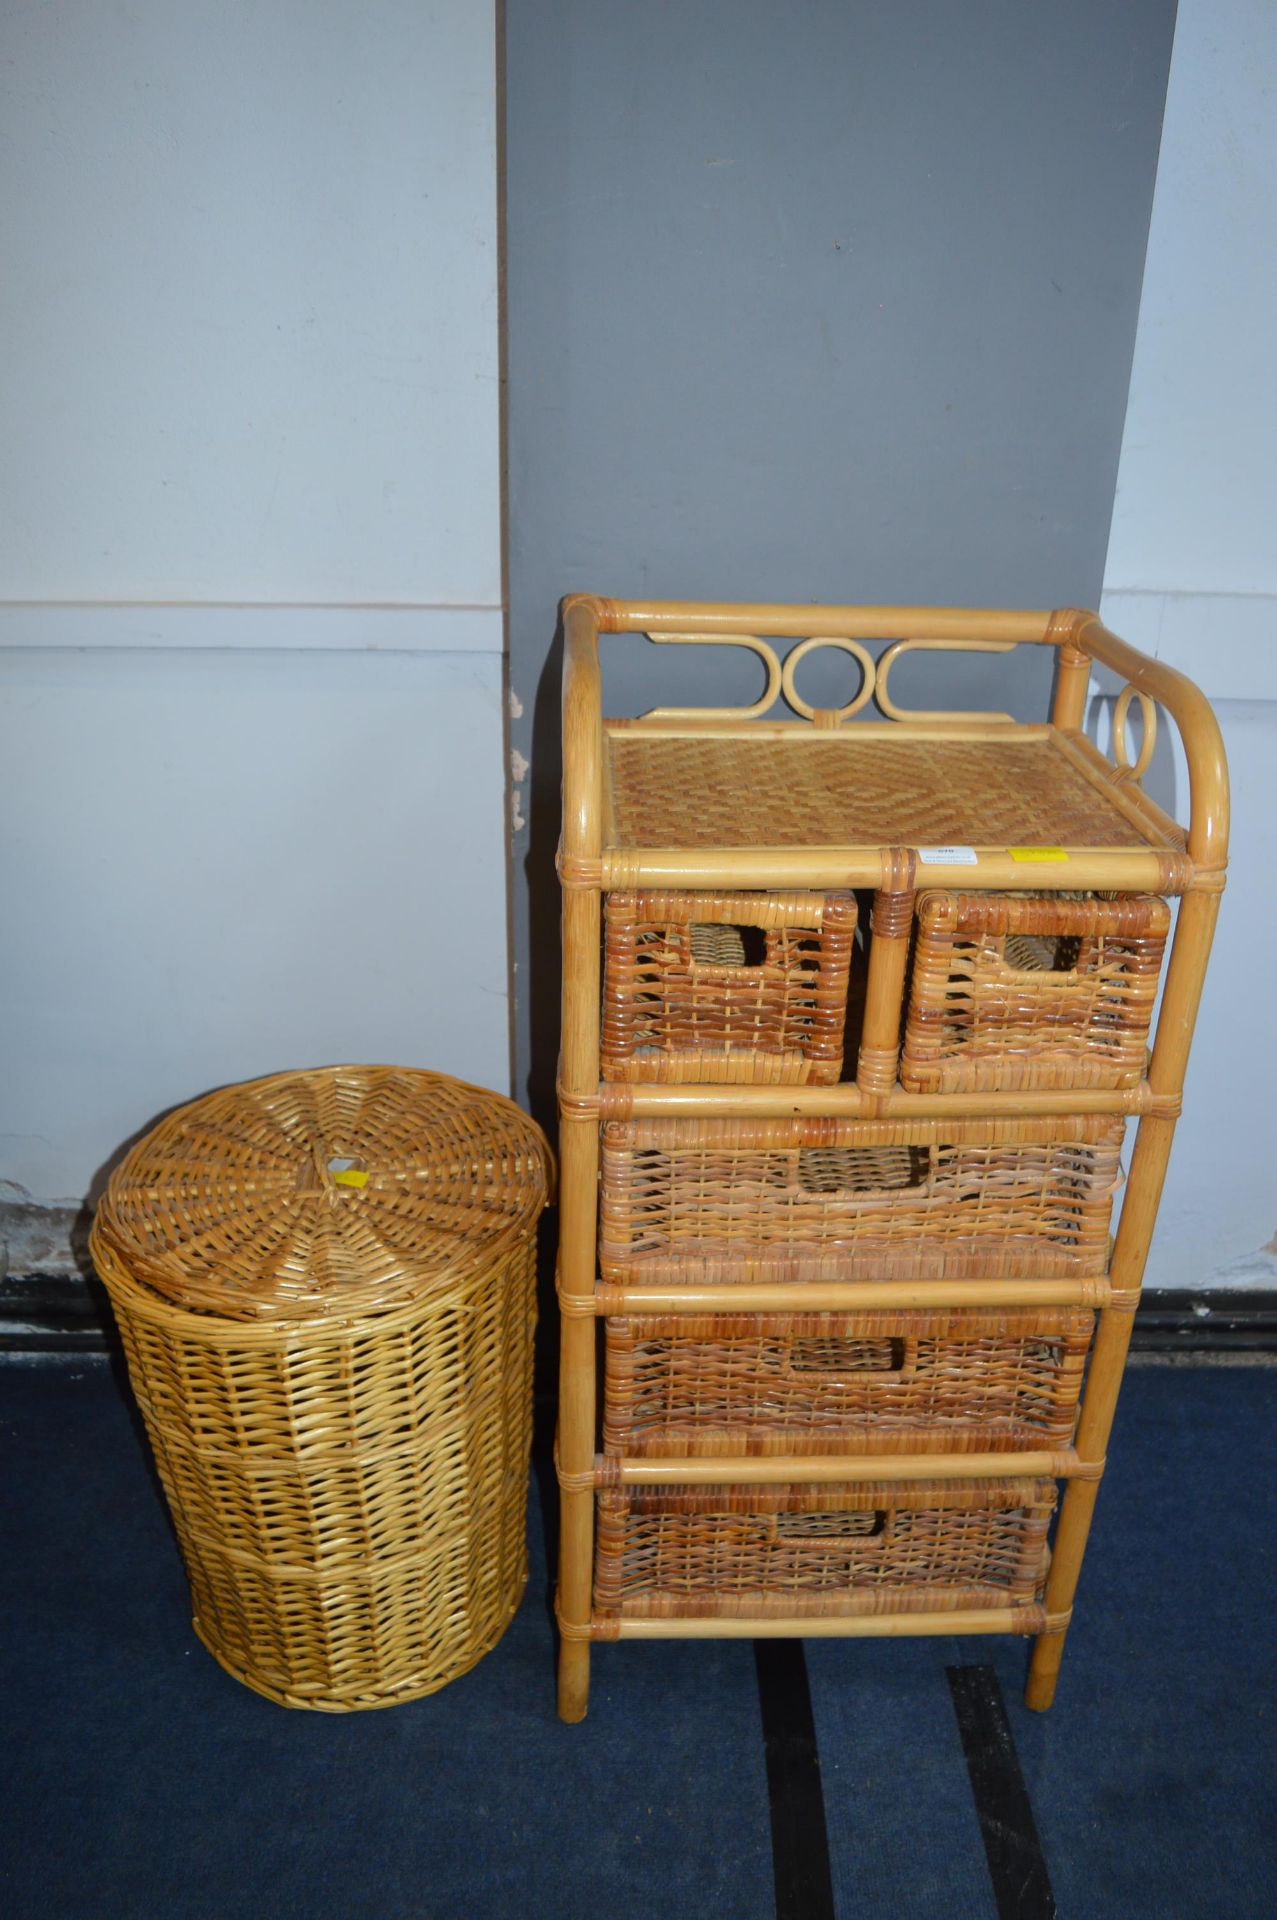 Cane Storage Unit with Baskets, Drawers and a Line